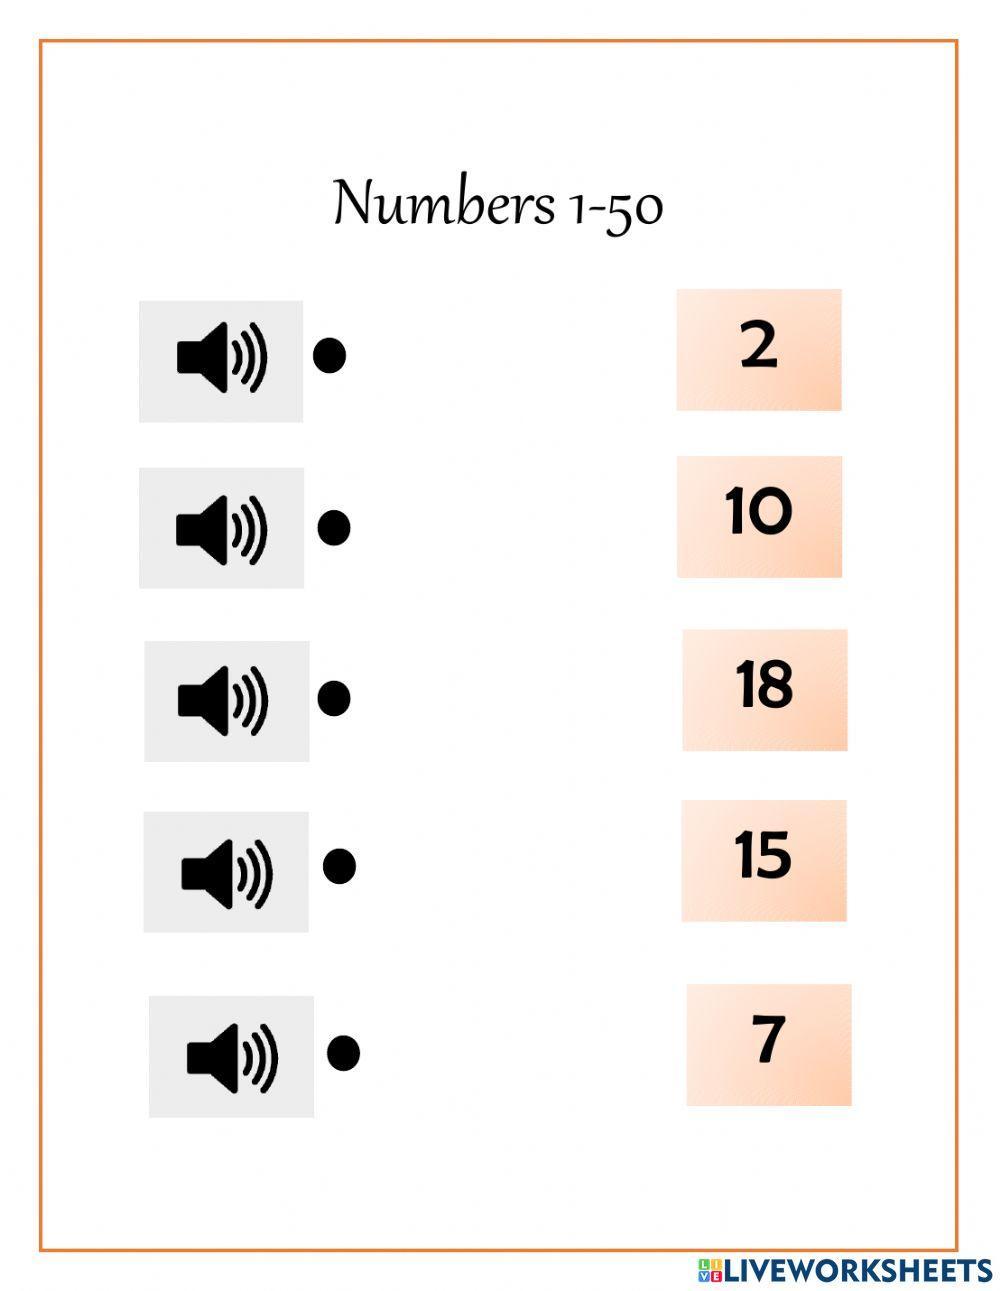 The Numbers 1-50